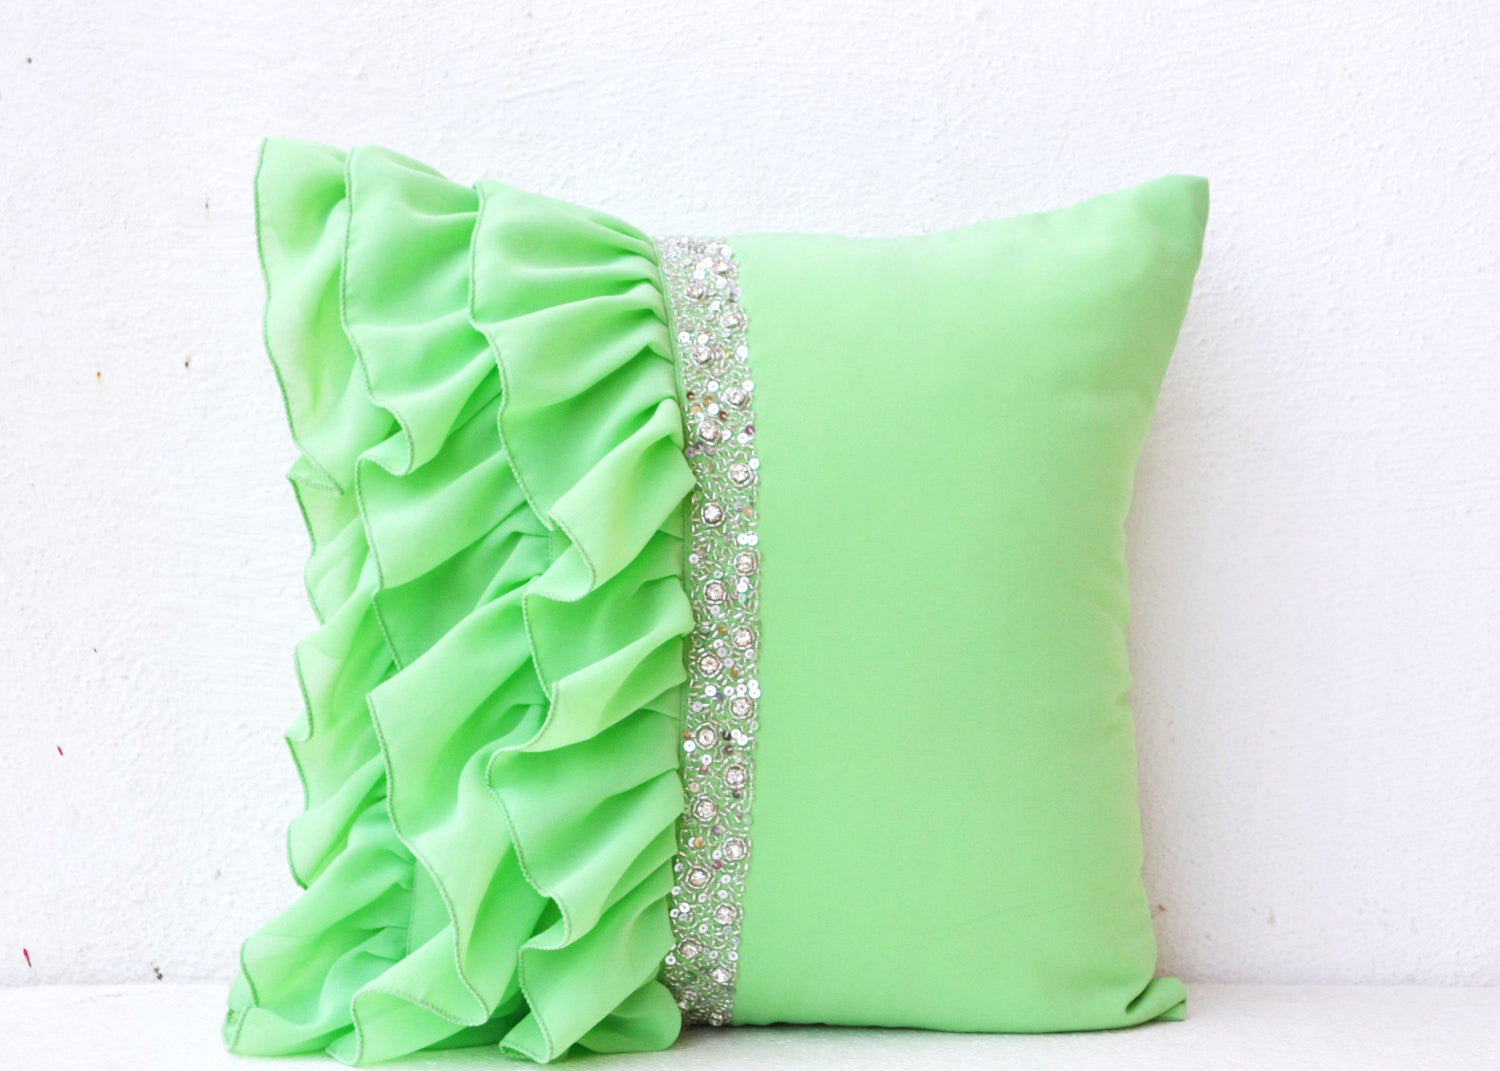 Handmade green throw pillows with ruffles and sequin